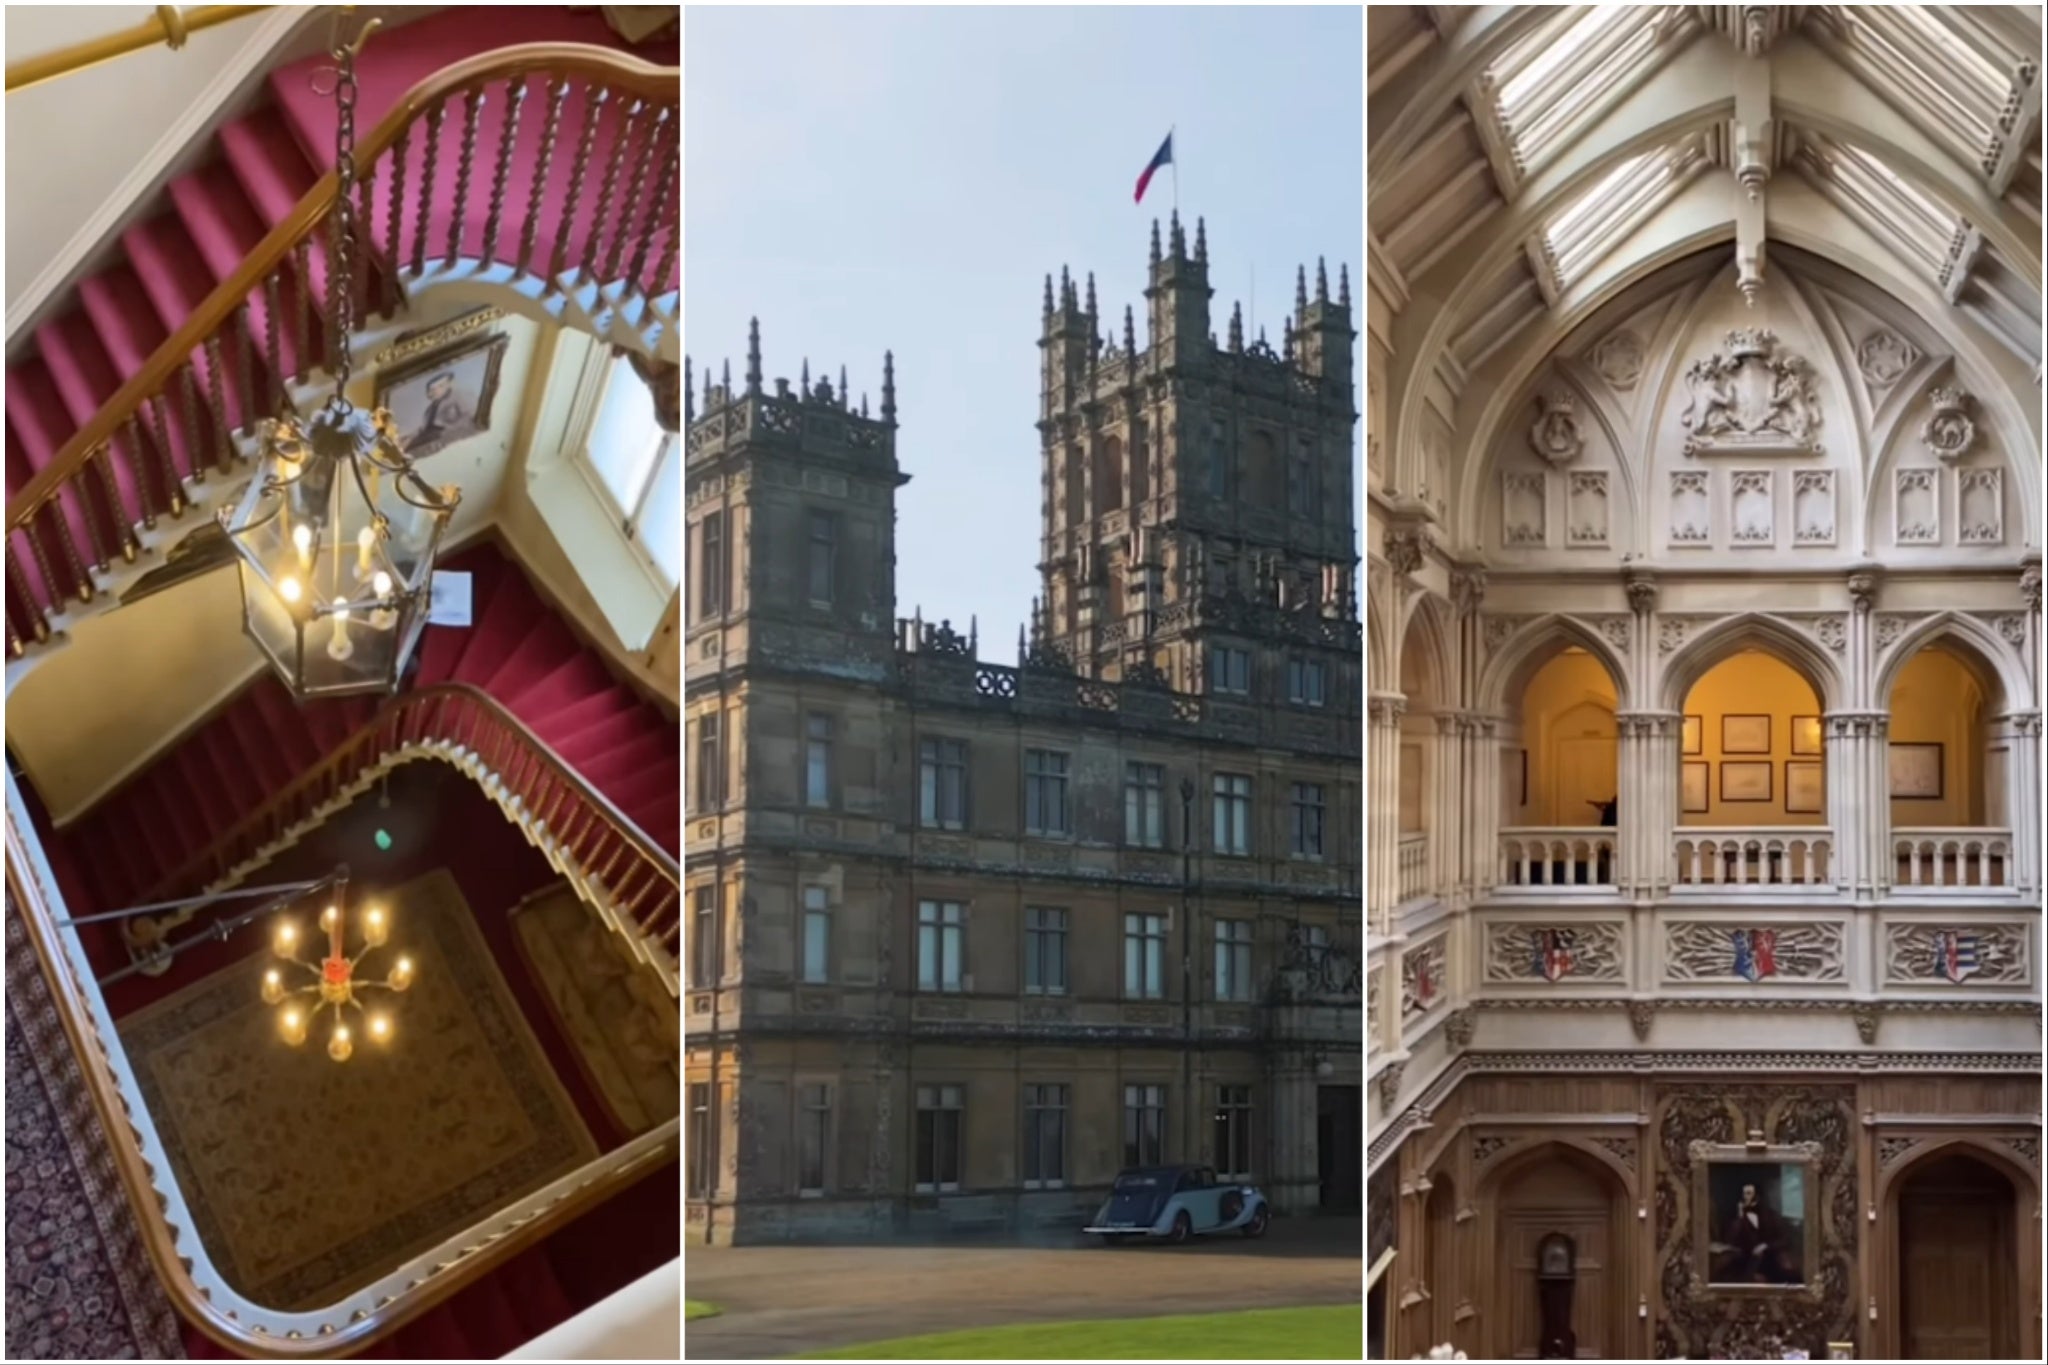 Highclere Castle, the setting for Downton Abbey